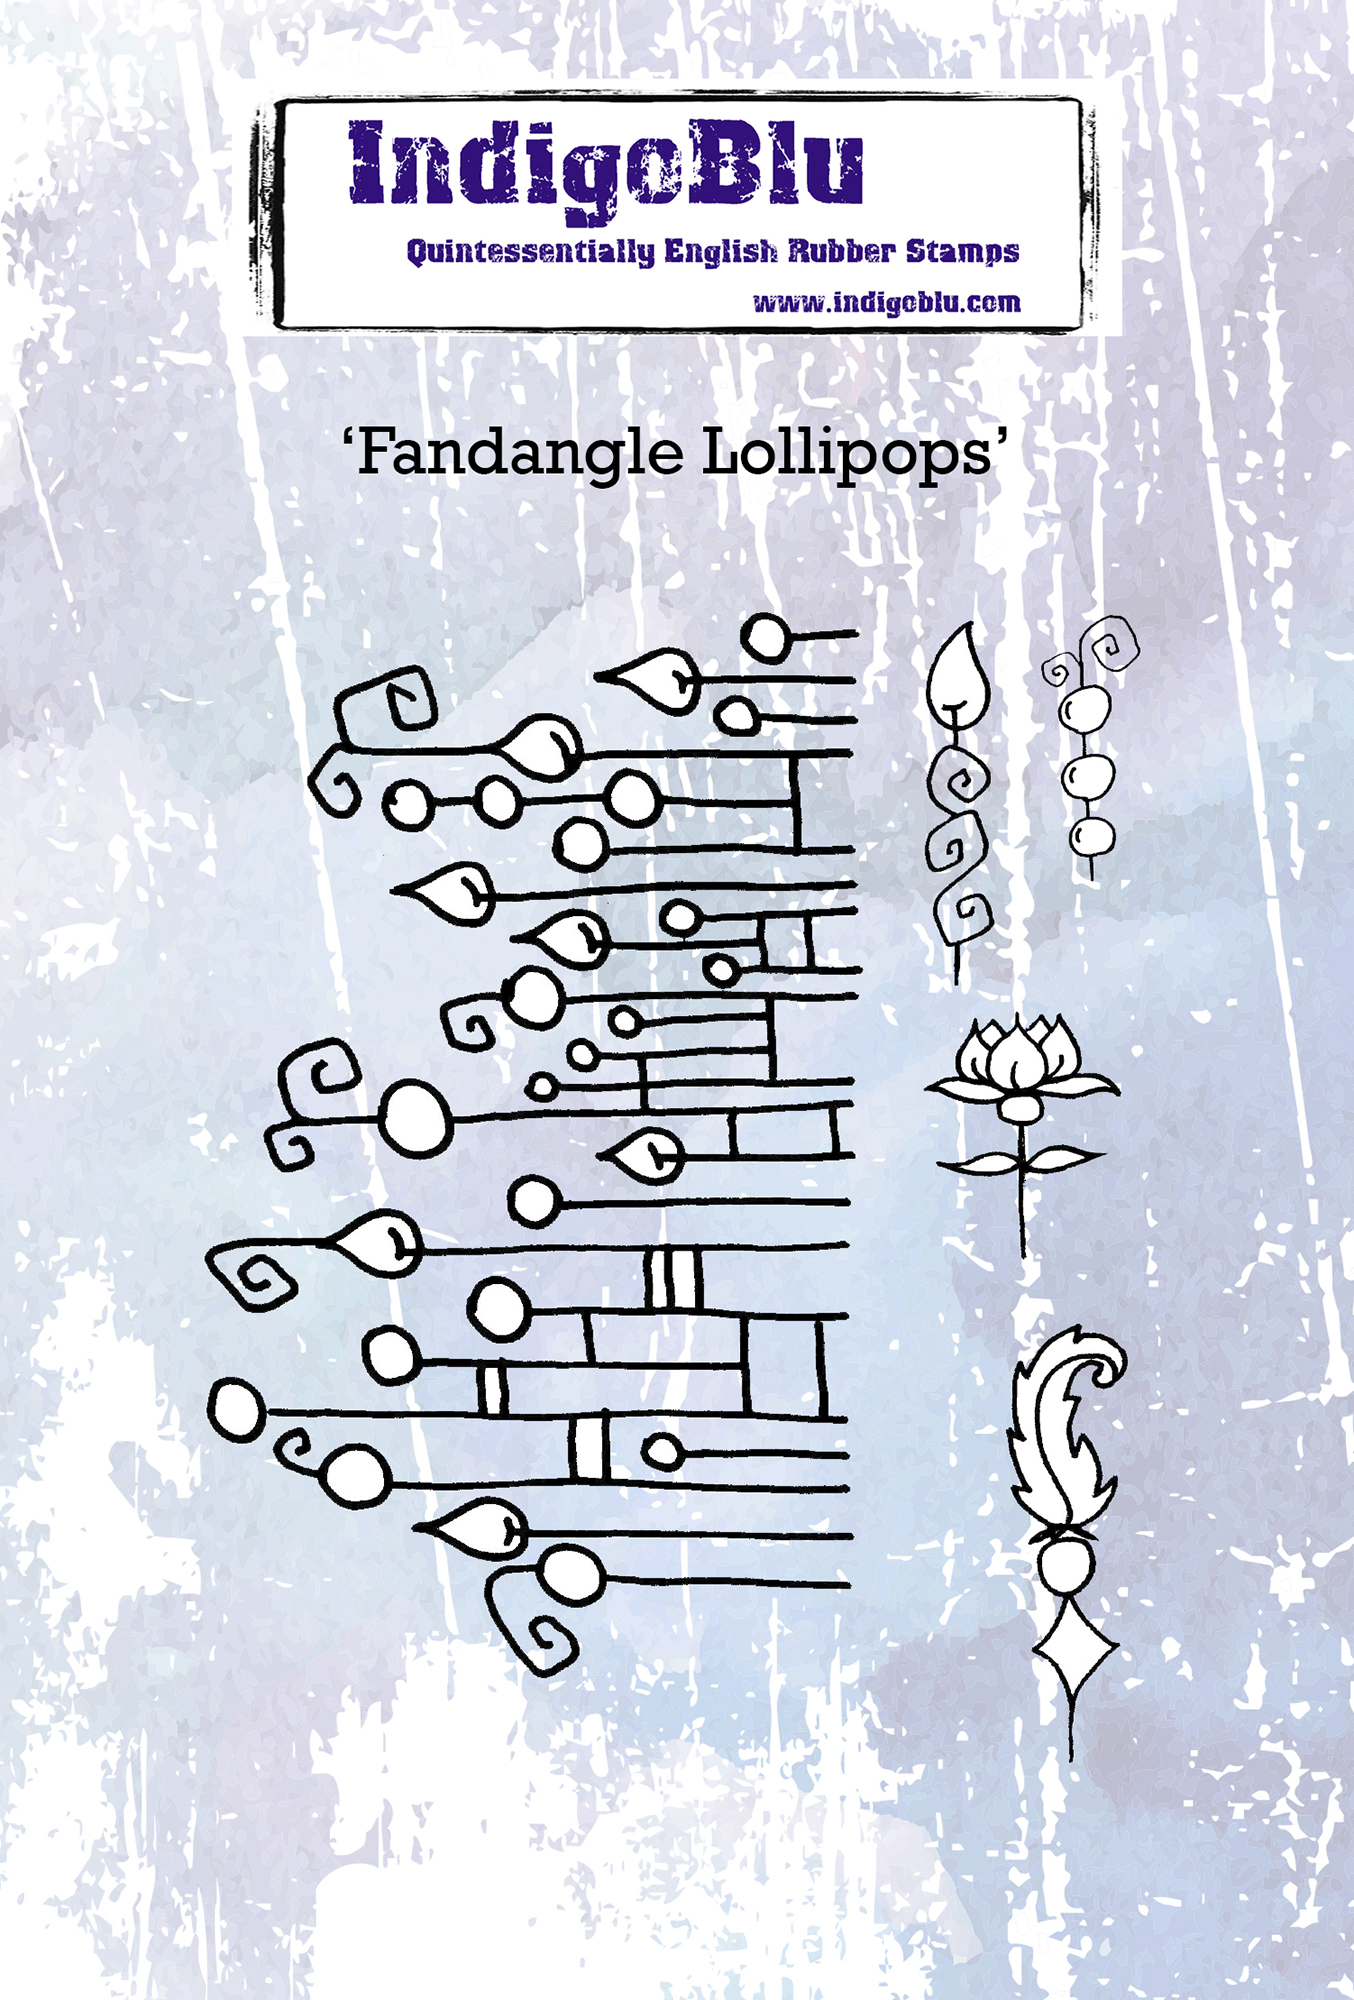 Fandangle Lollipops A6 Red Rubber Stamp by Kay Halliwell-Sutton